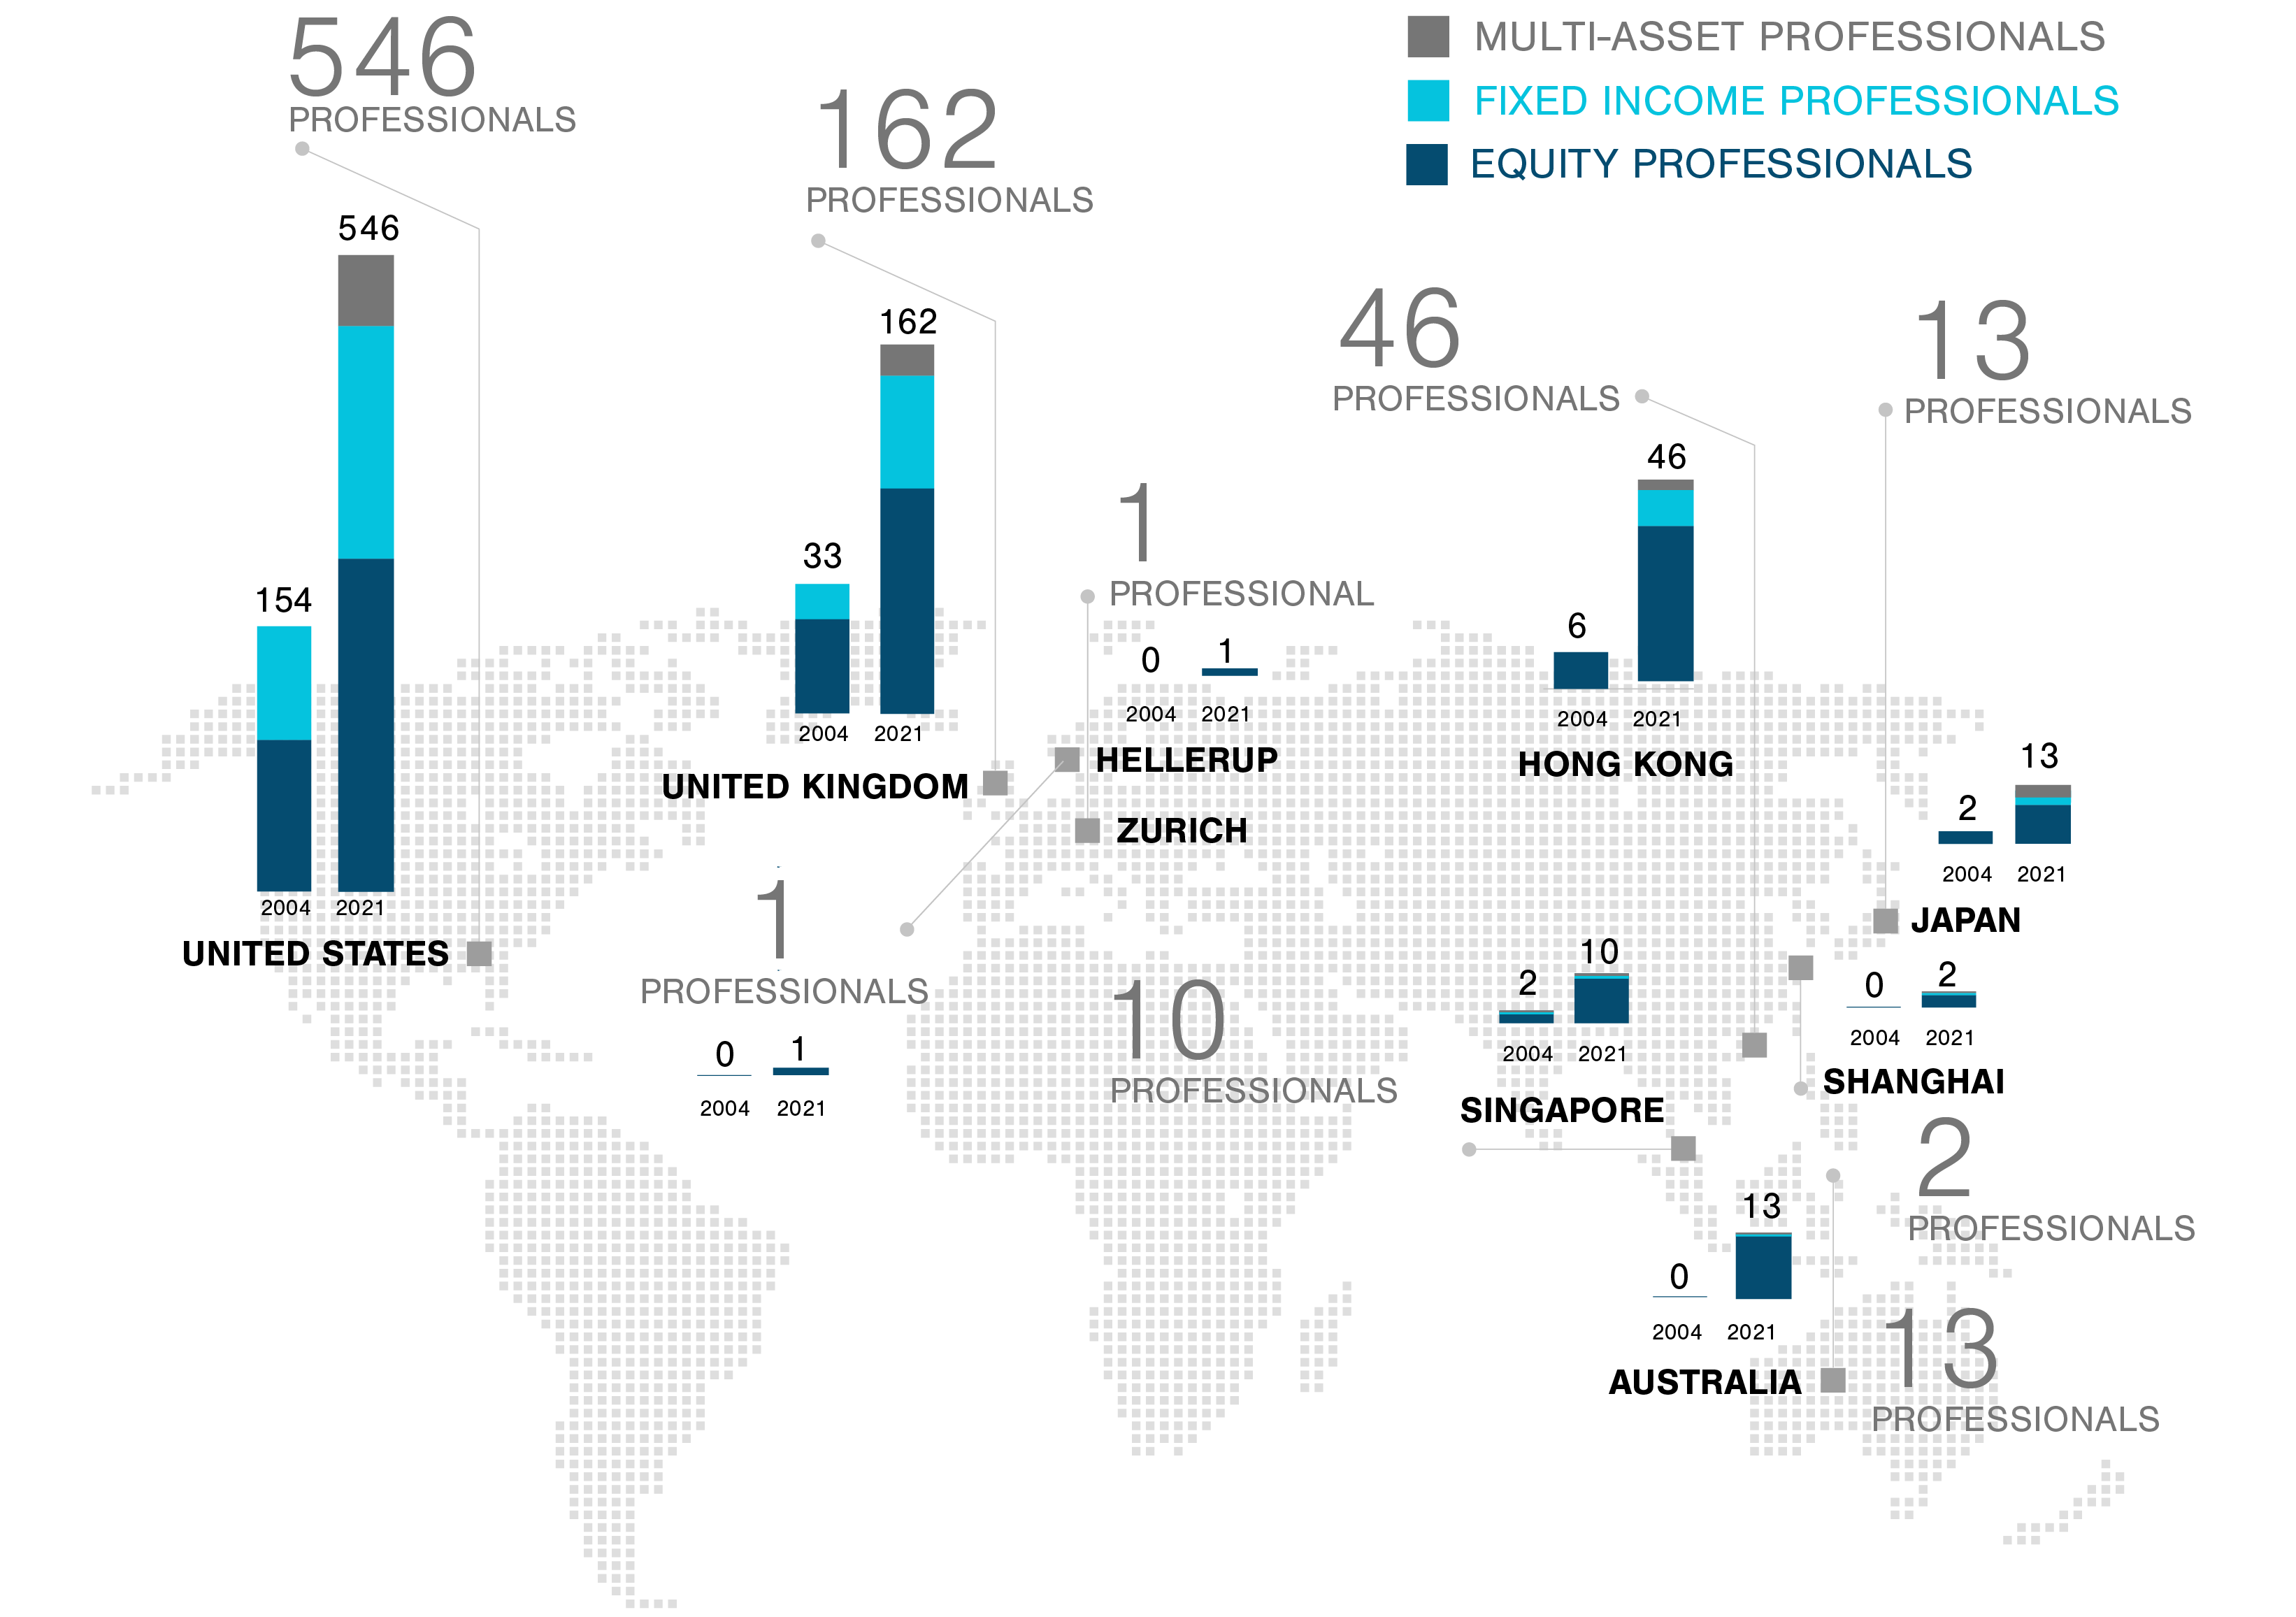 T. Rowe Price has investment professionals across the globe. This graphic shows where our investment professionals are located: 546 in the US, 162 in the UK, one in Denmark, one in Switzerland, 48 in China, 13 in Japan, 10 in Singapore, and 13 in Australia.